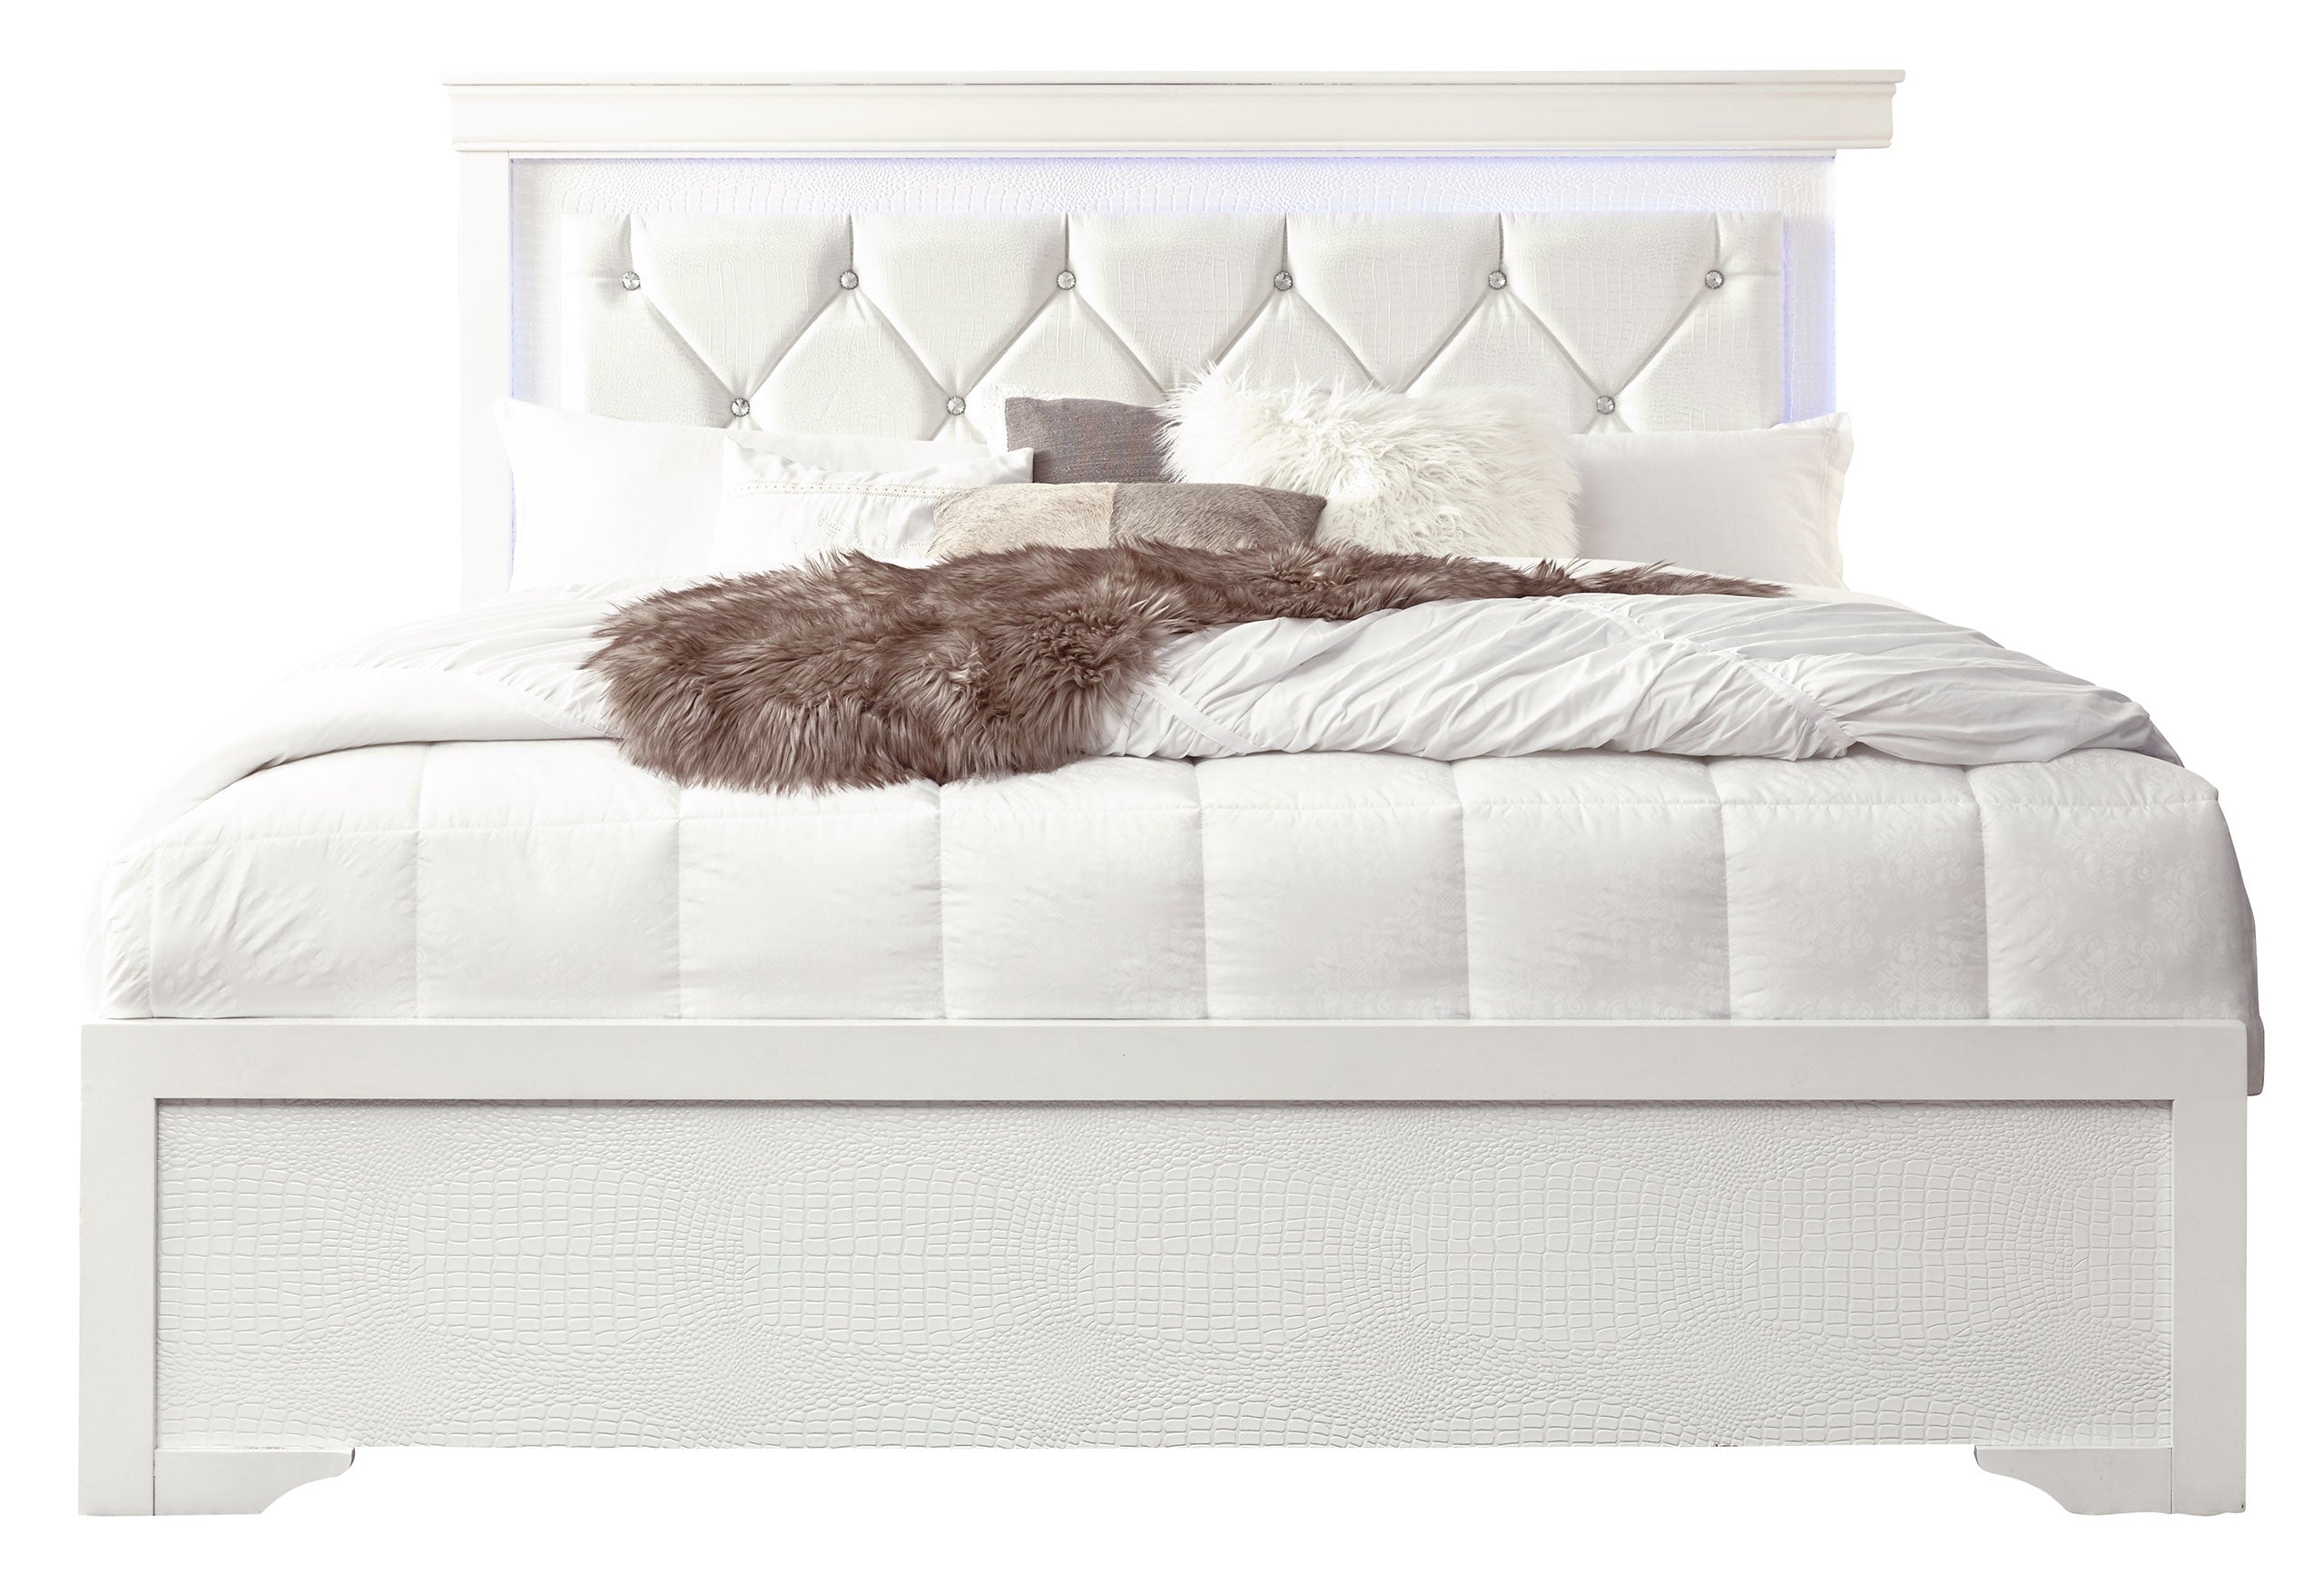 POMPEI - FULL BED WITH LED, KING BED WITH LED, QUEEN BED WITH LED, BOOKCASE TWIN BED WITH LED, FULL BED WITH LED, KING BED WITH LED, QUEEN BED WITH LED